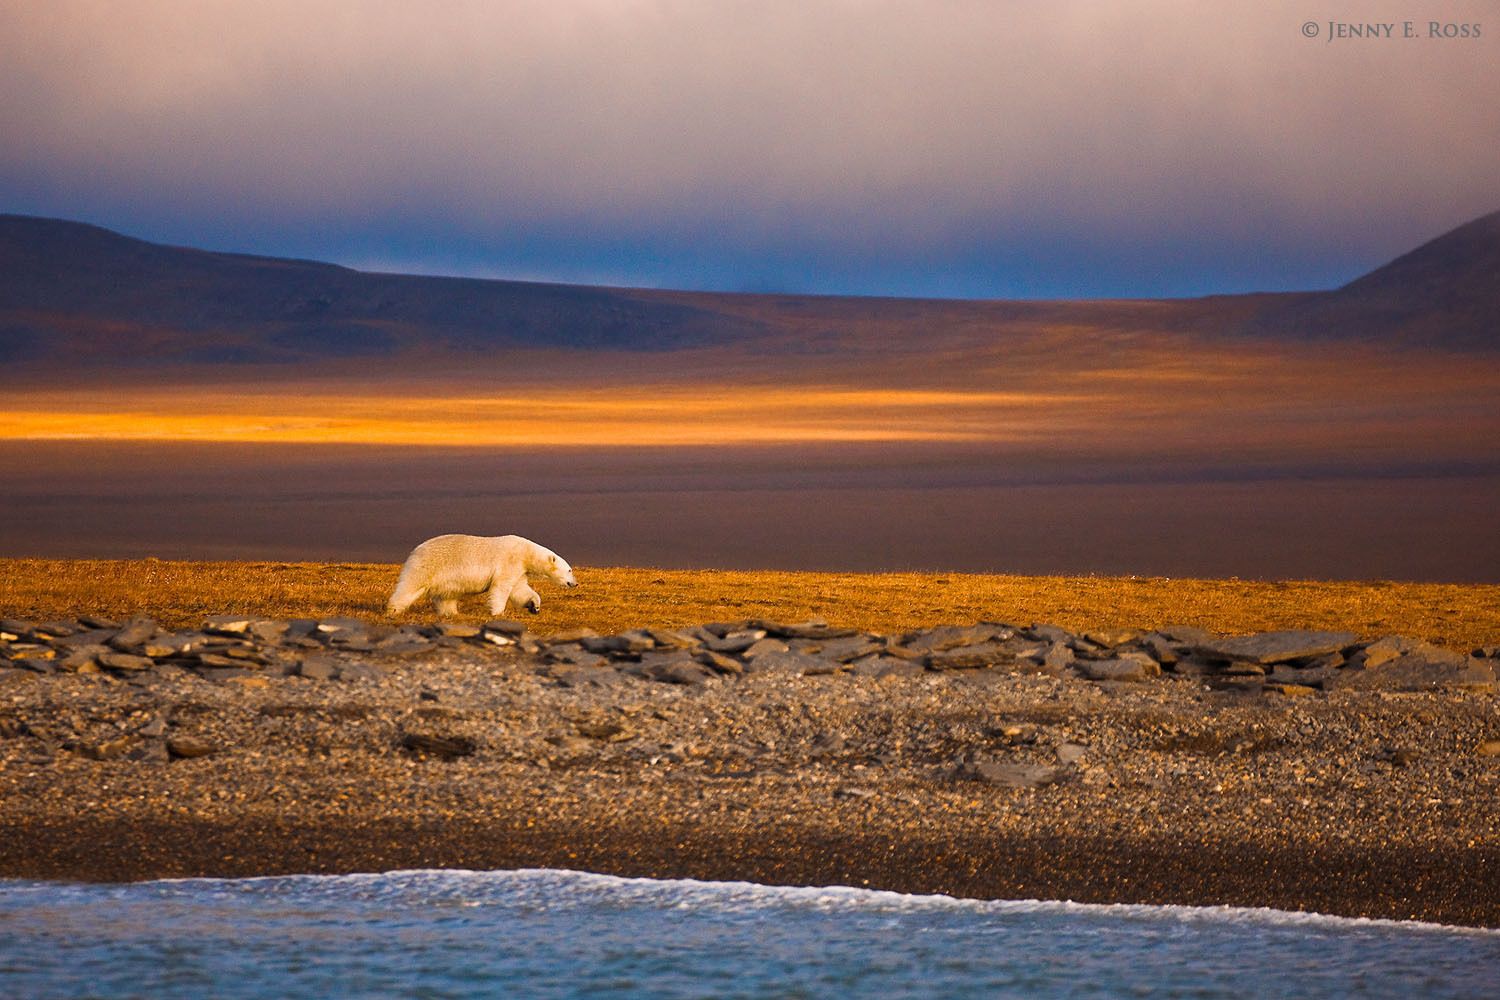 An adult male polar bear wanders along the ice-free shoreline of Wrangel Island in the Russian High Arctic, stranded there due to lack of sea ice.